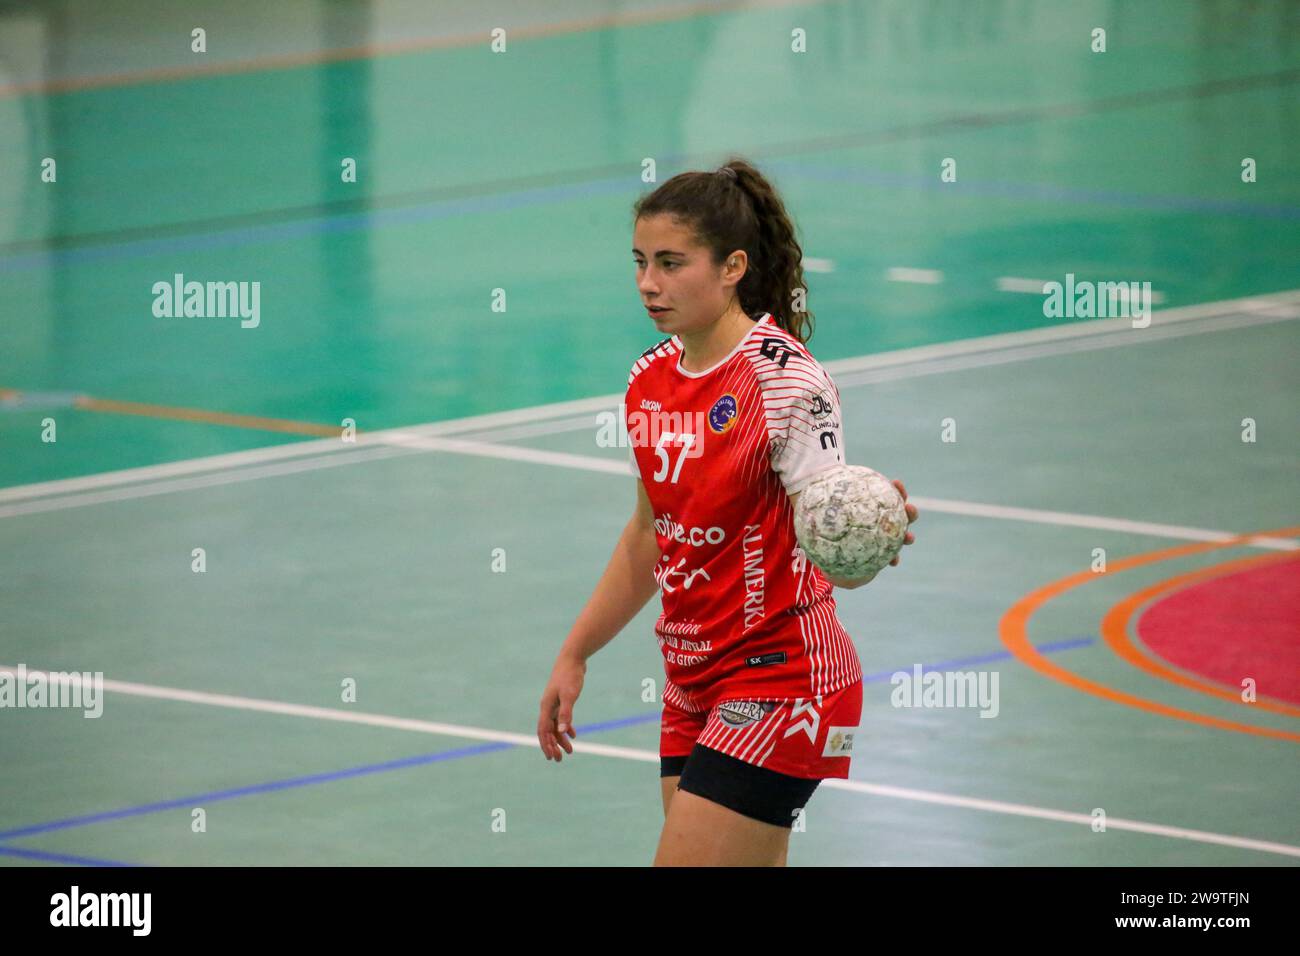 Gijon, Spain. 29th Dec, 2023. The player of Motive.co Gijon Balonmano La Calzada, Rocio Rojas (57) with the ball during the 13th matchday of the Liga Guerreras Iberdrola 2023-24 between Motive.co Gijon Balonmano La Calzada and the Mecalia Atletico Guardes, on December 29, 2023, at the La Arena Pavilion, in Gijon, Spain. (Photo by Alberto Brevers/Pacific Press) Credit: Pacific Press Media Production Corp./Alamy Live News Stock Photo